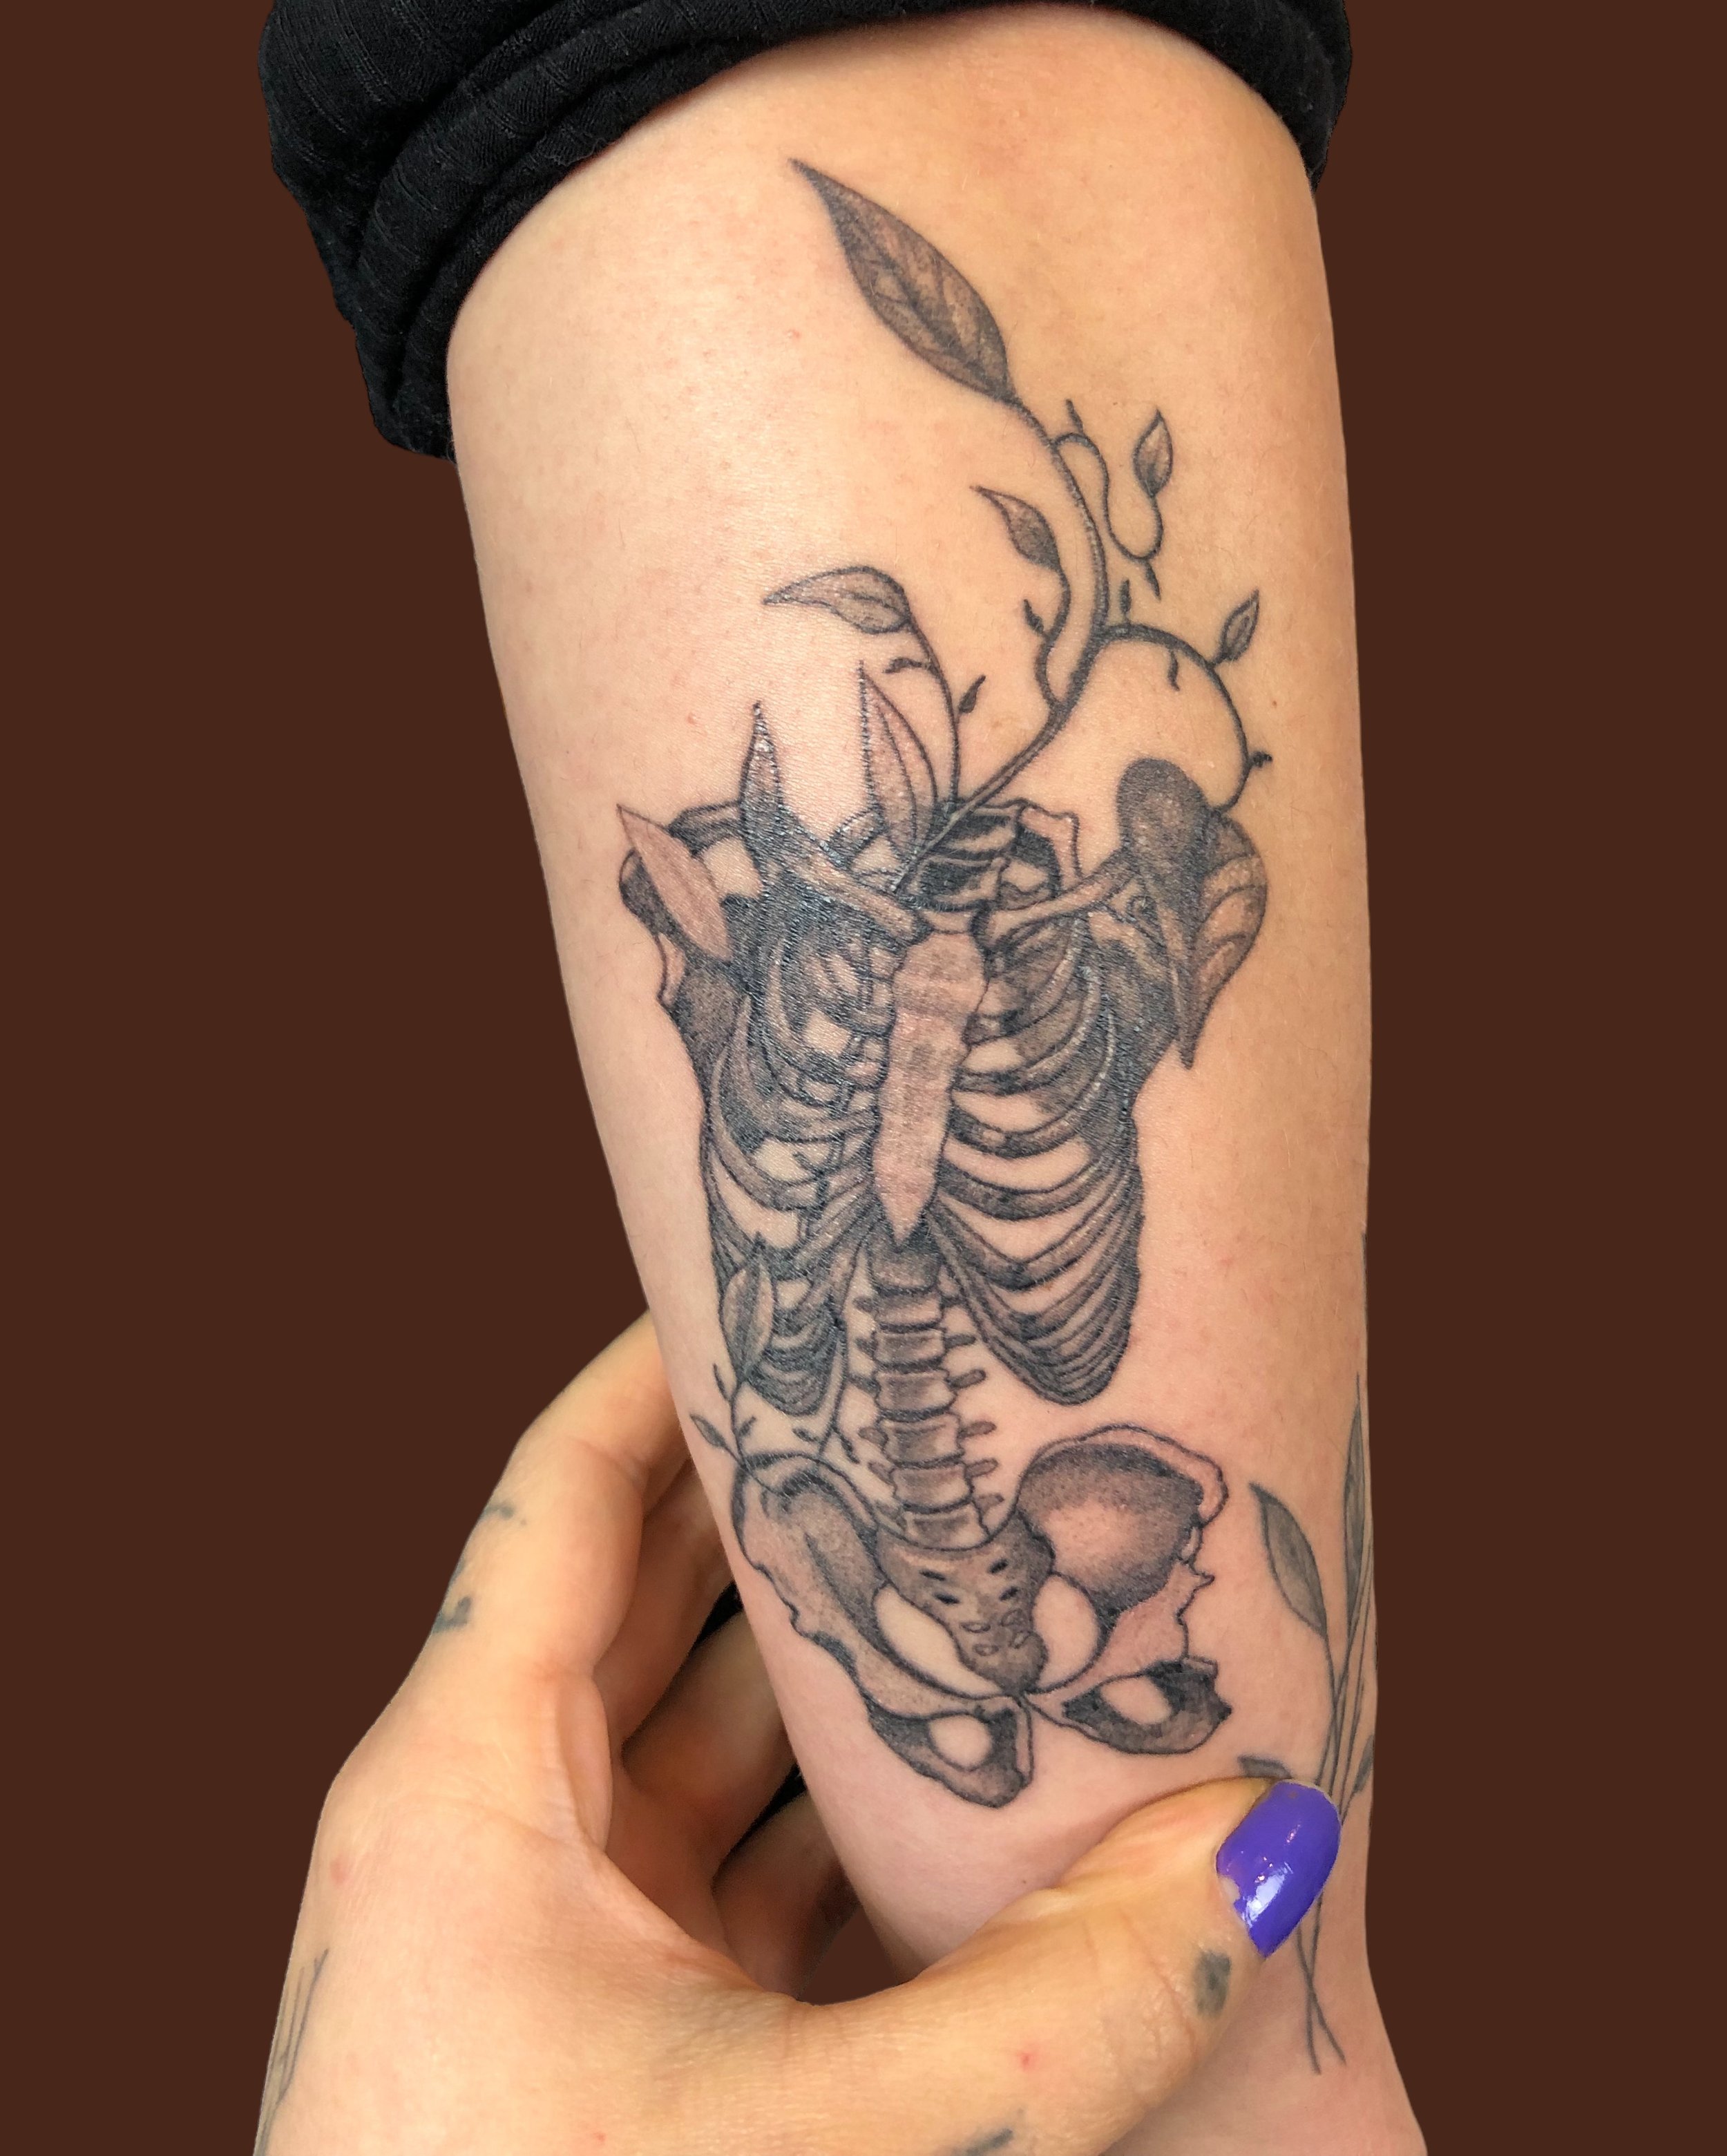 Skeletton Tattoo with branches by donna aviles.JPG